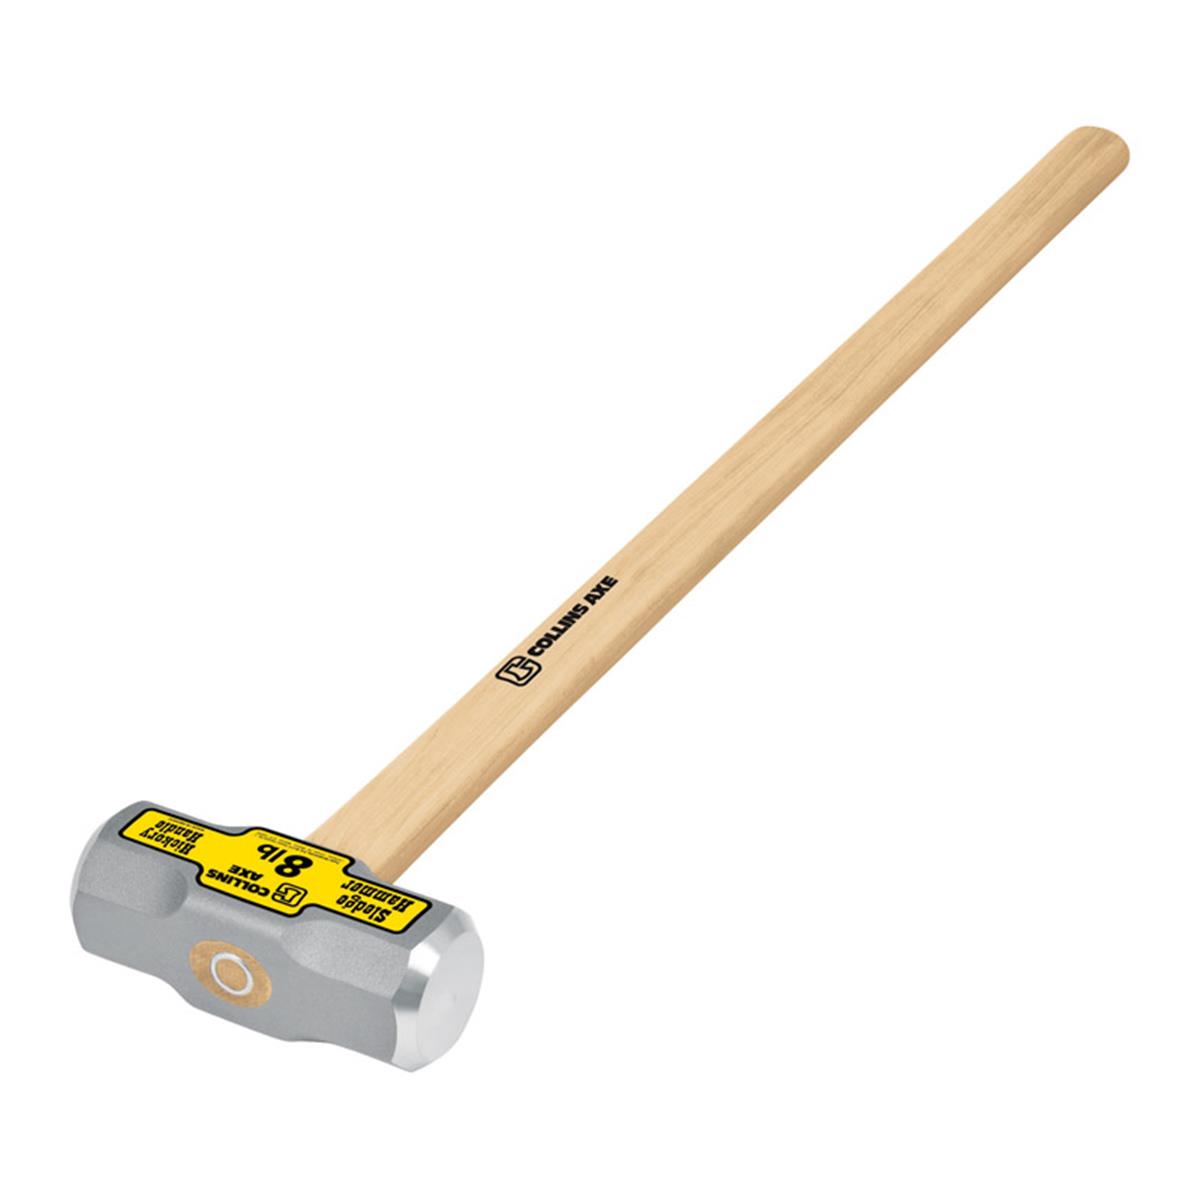 Md-8h-c32426 Double Face Sledge Hammer Collins